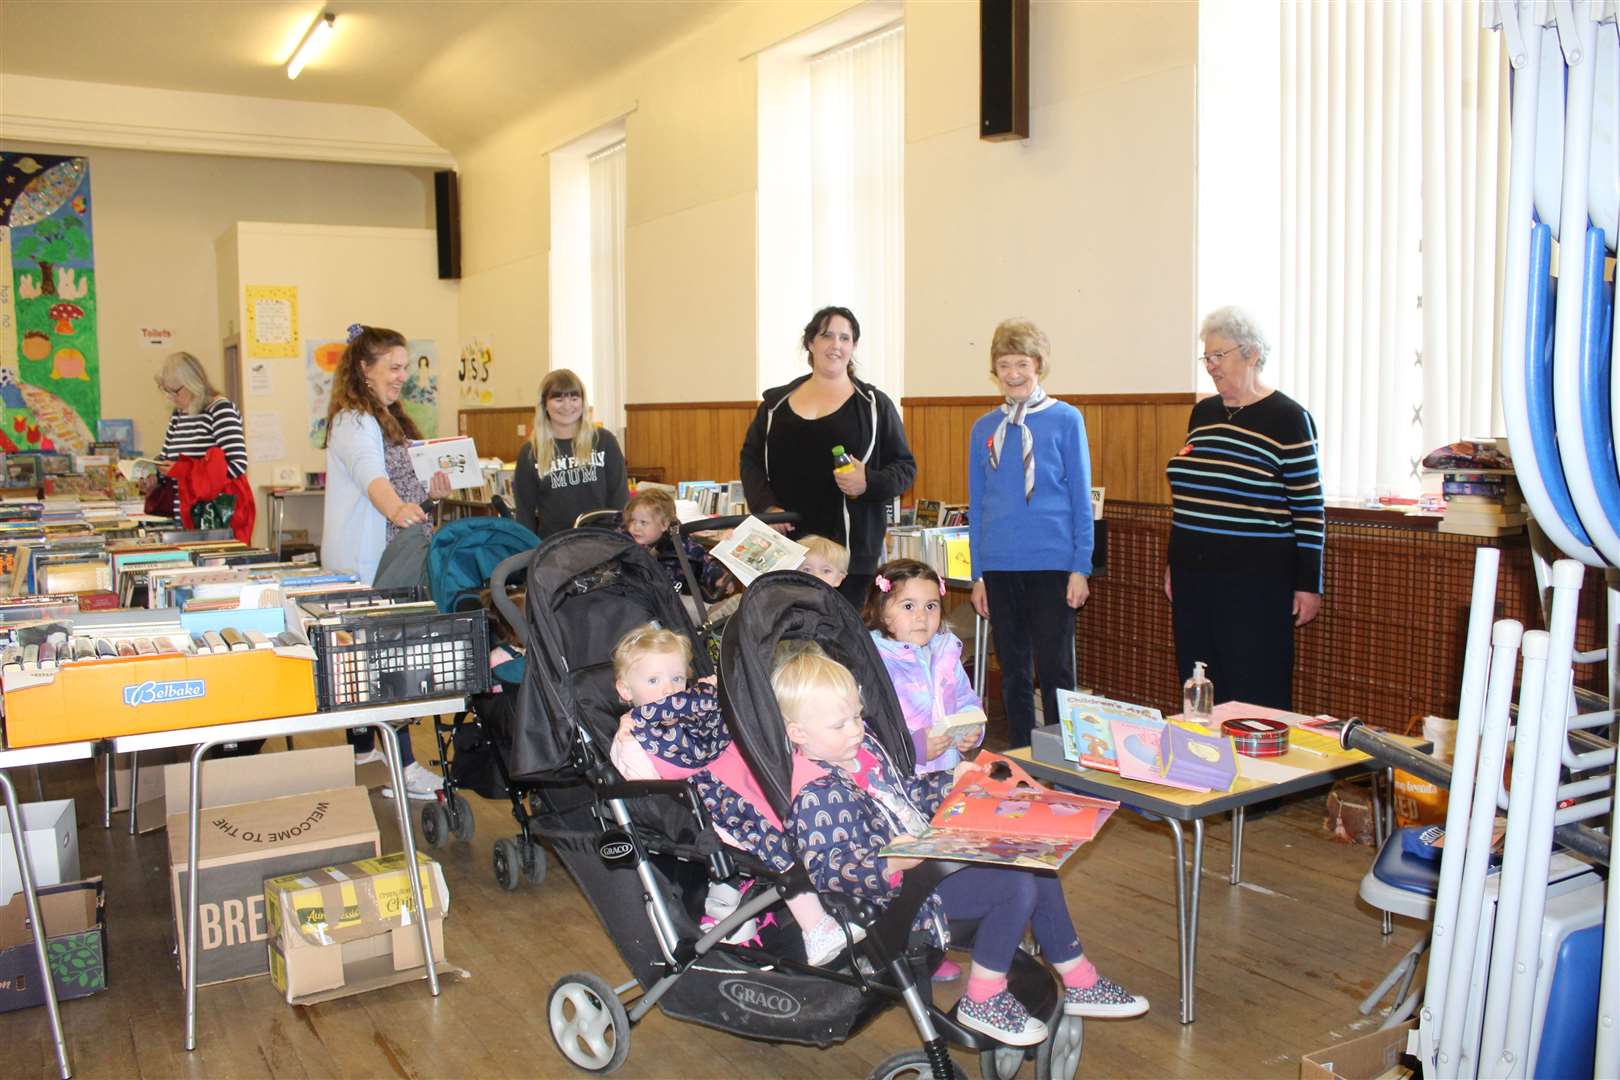 Some of the young visitors and mums from Tuesday's Mainly Music who dropped in to the Christian Aid book sale at West Church hall. Picture: Griselda McGregor